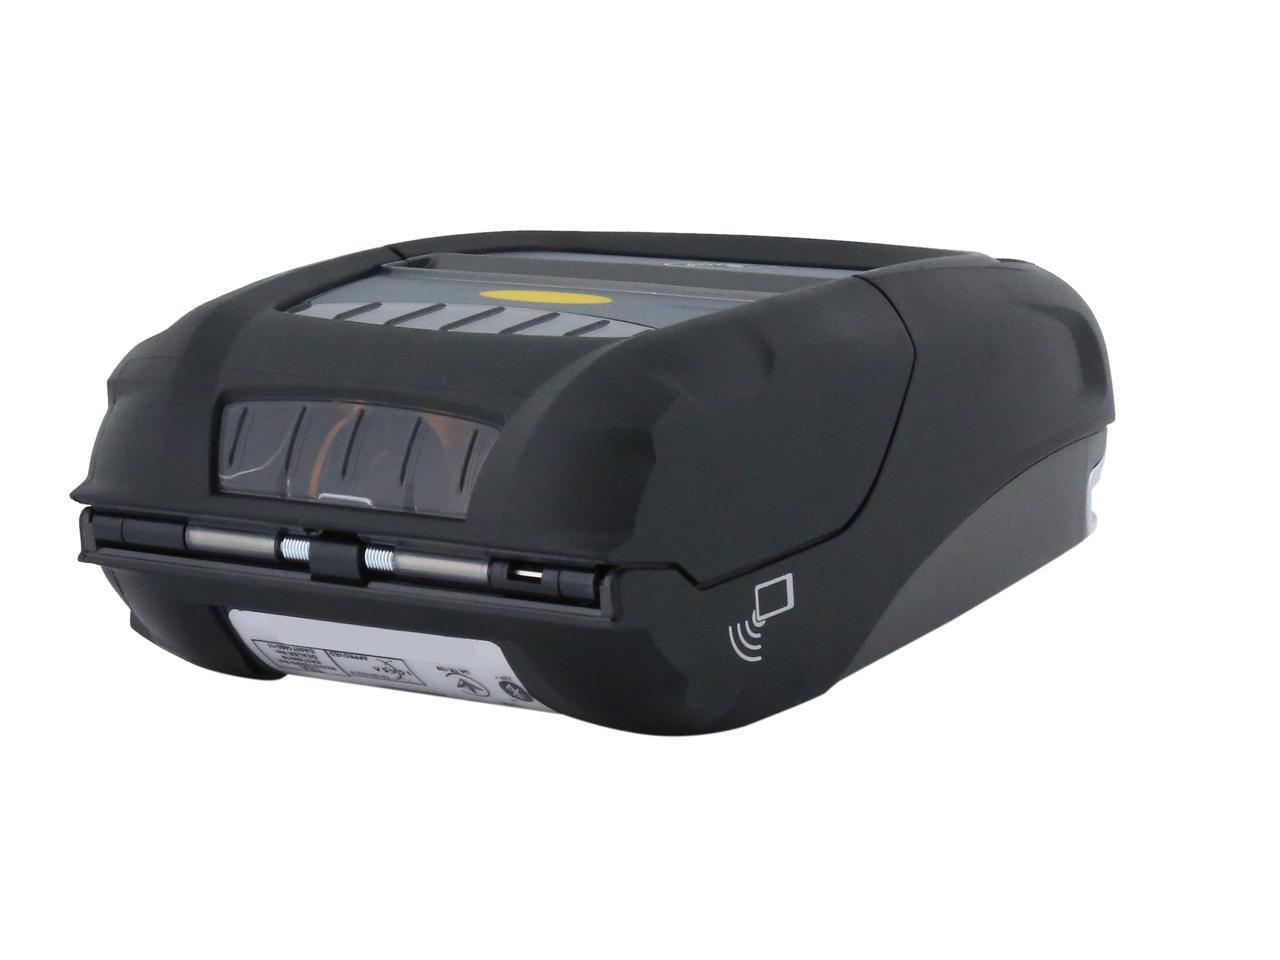 Zebra Zq510 3 Mobile Direct Thermal Receipt And Label Printer 203 Dpi Bluetooth 40 Linered 5985